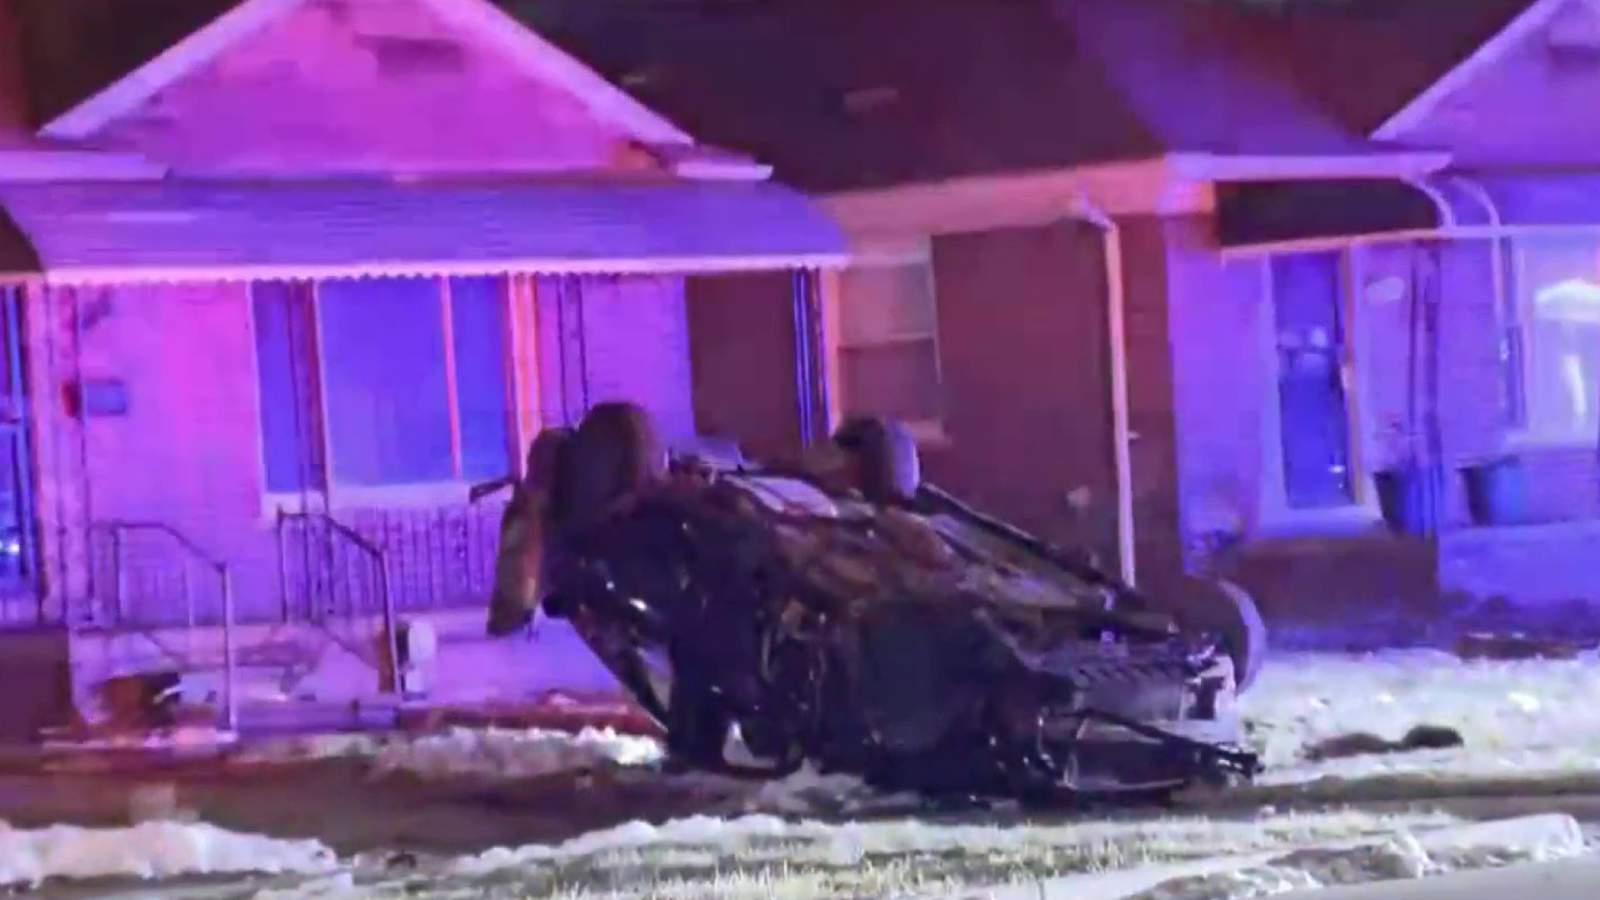 Home invasion suspects arrested after chase, rollover crash on Ryan Road near 8 Mile in Detroit